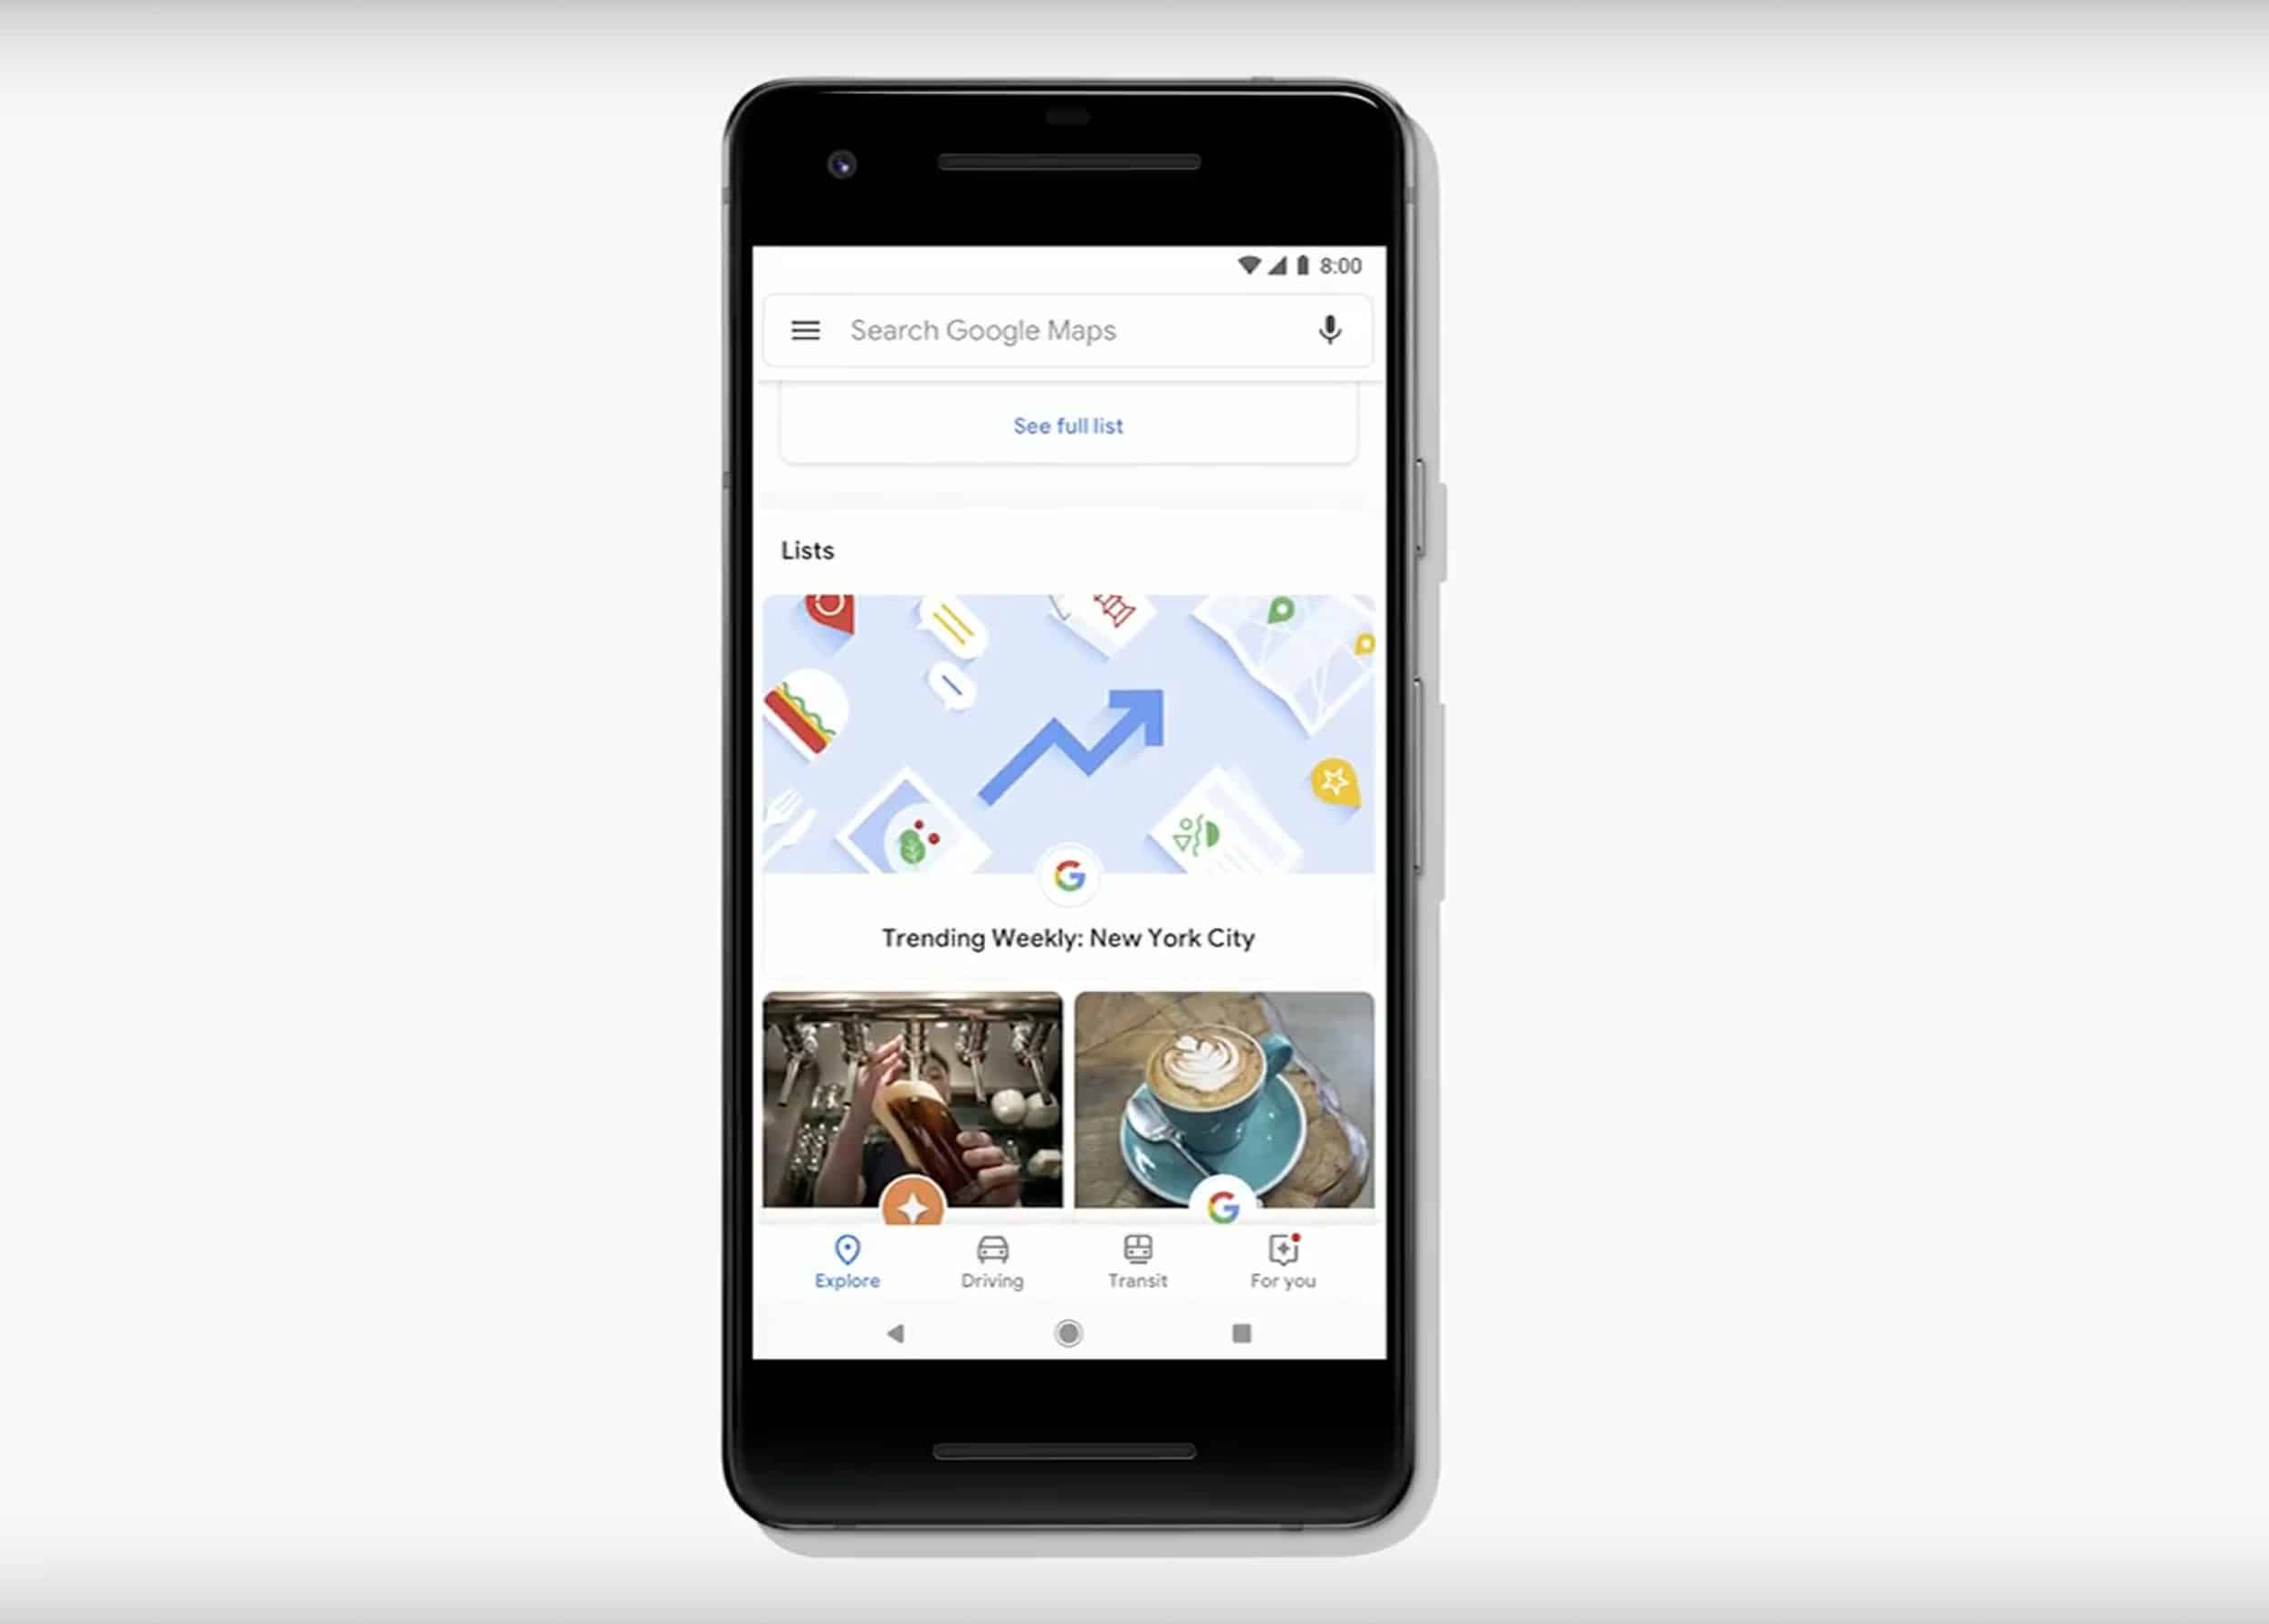 Google Maps can help you find events now.